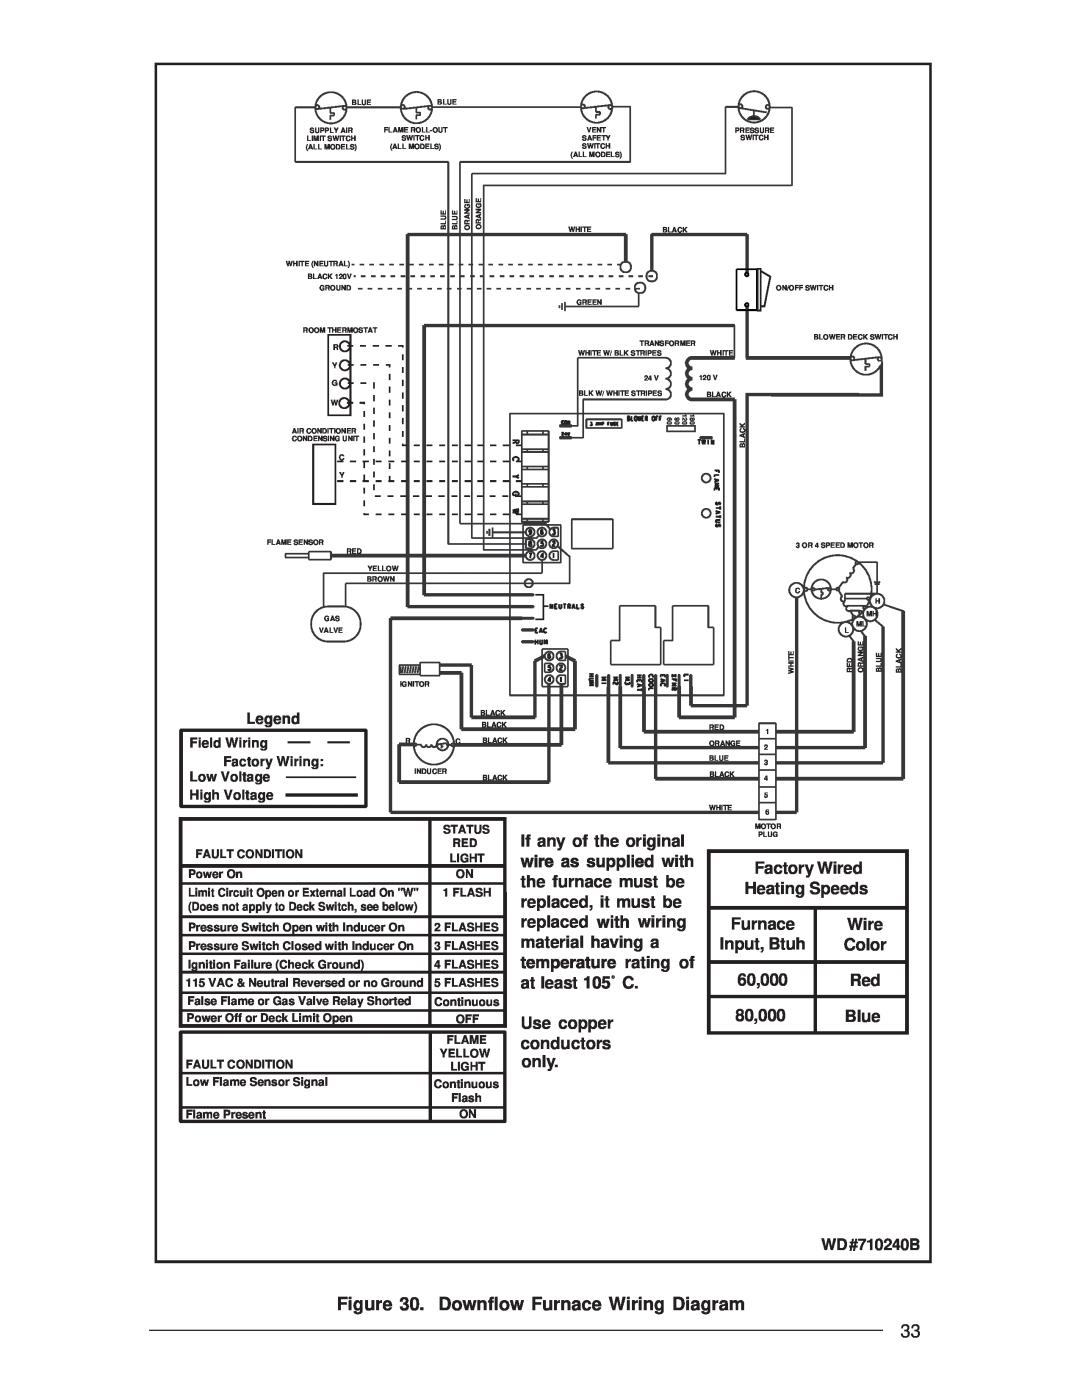 Nordyne M3RL Series Downflow Furnace Wiring Diagram, If any of the original, with, Factory Wired, the furnace must be 